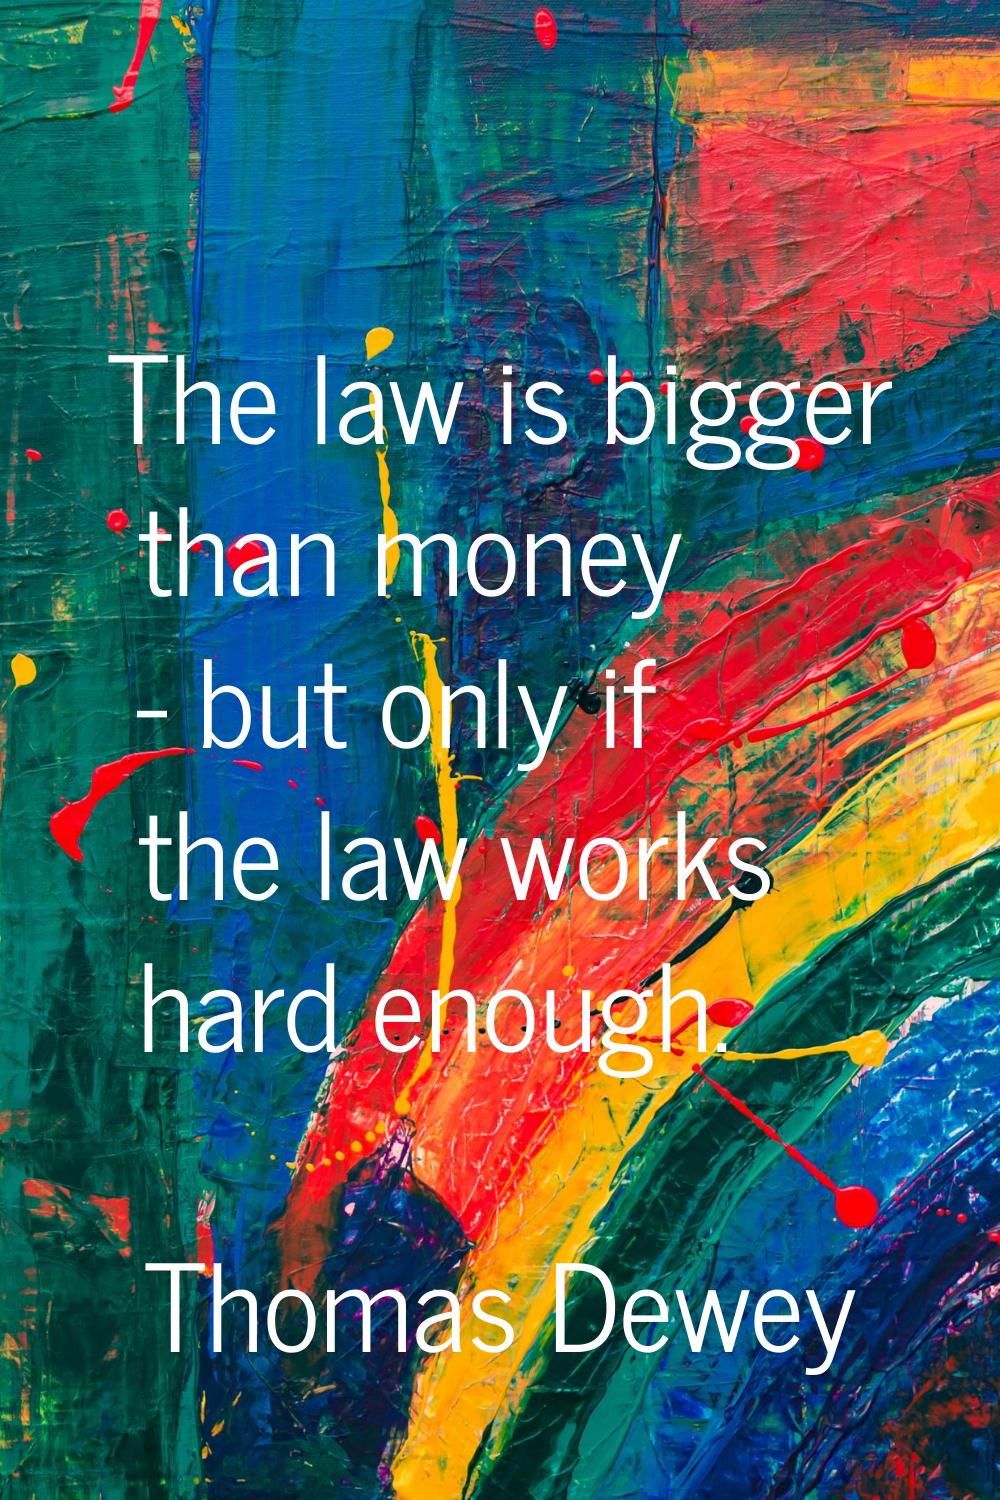 The law is bigger than money - but only if the law works hard enough.